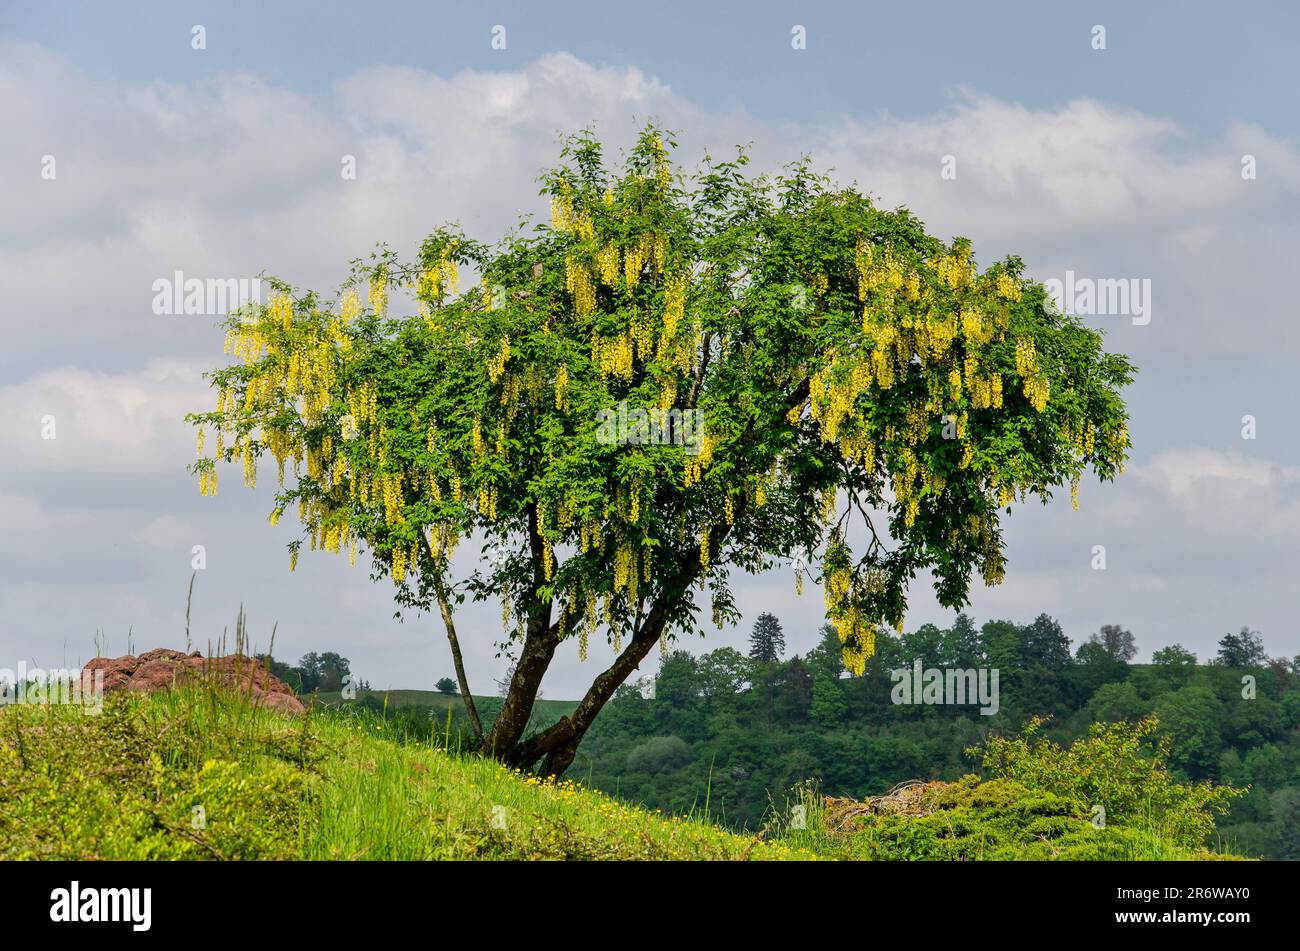 Golden rain or laburnum tree in bloom on the outskirts of the town of Schalkenmehren in Germany Stock Photo